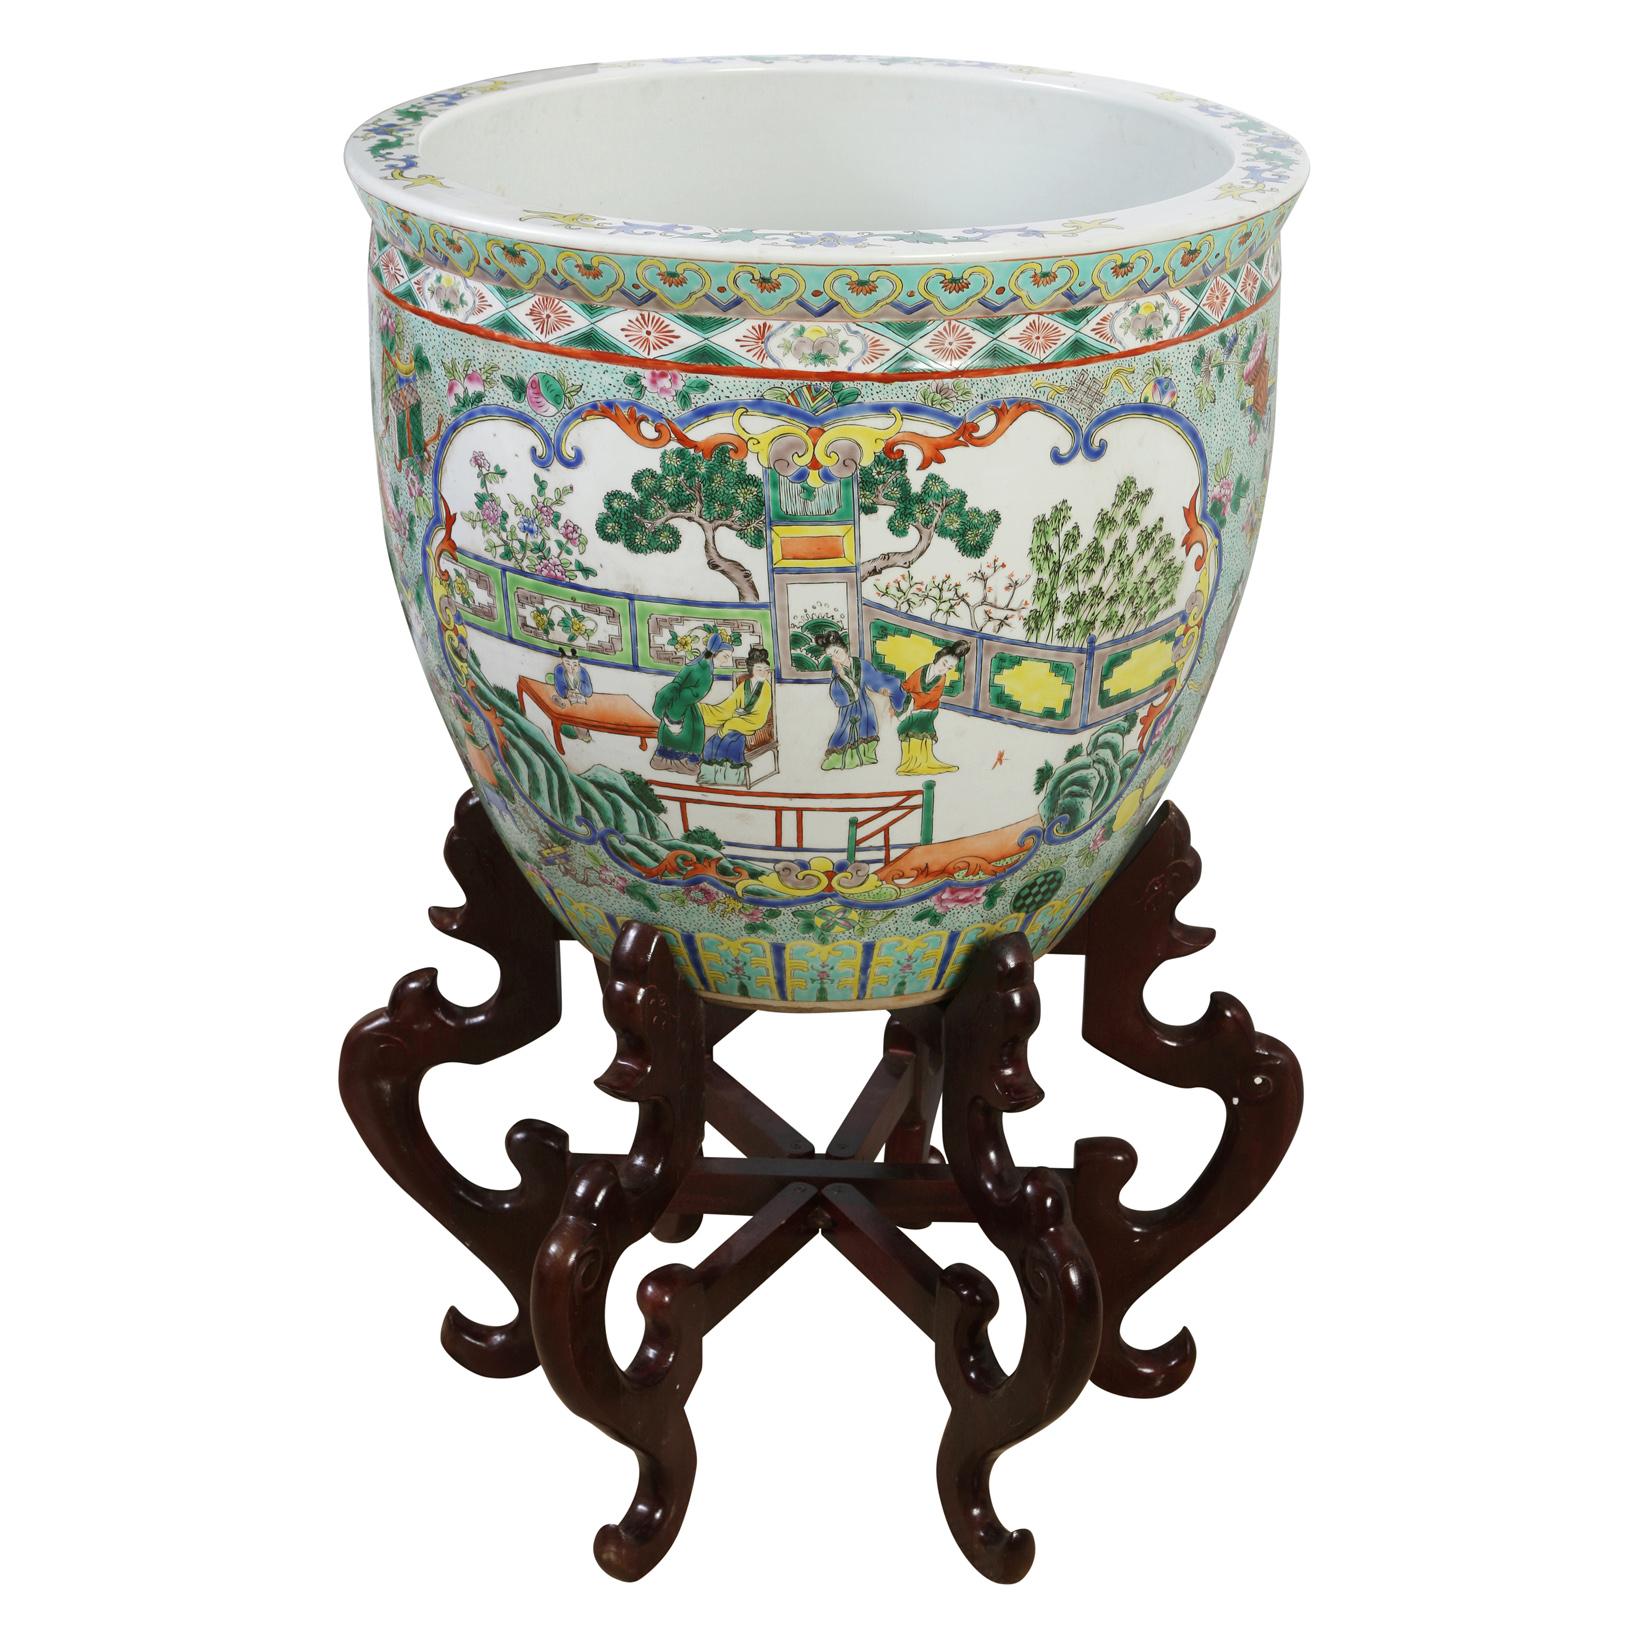 A pair of oversize chinoiserie painted porcelain planters on hexagonal curved wood stands.  The vintage porcelain fish bowl jardineres are decorated with varied shades of greens and blue with two panels of colorful figural and garden scenes. The